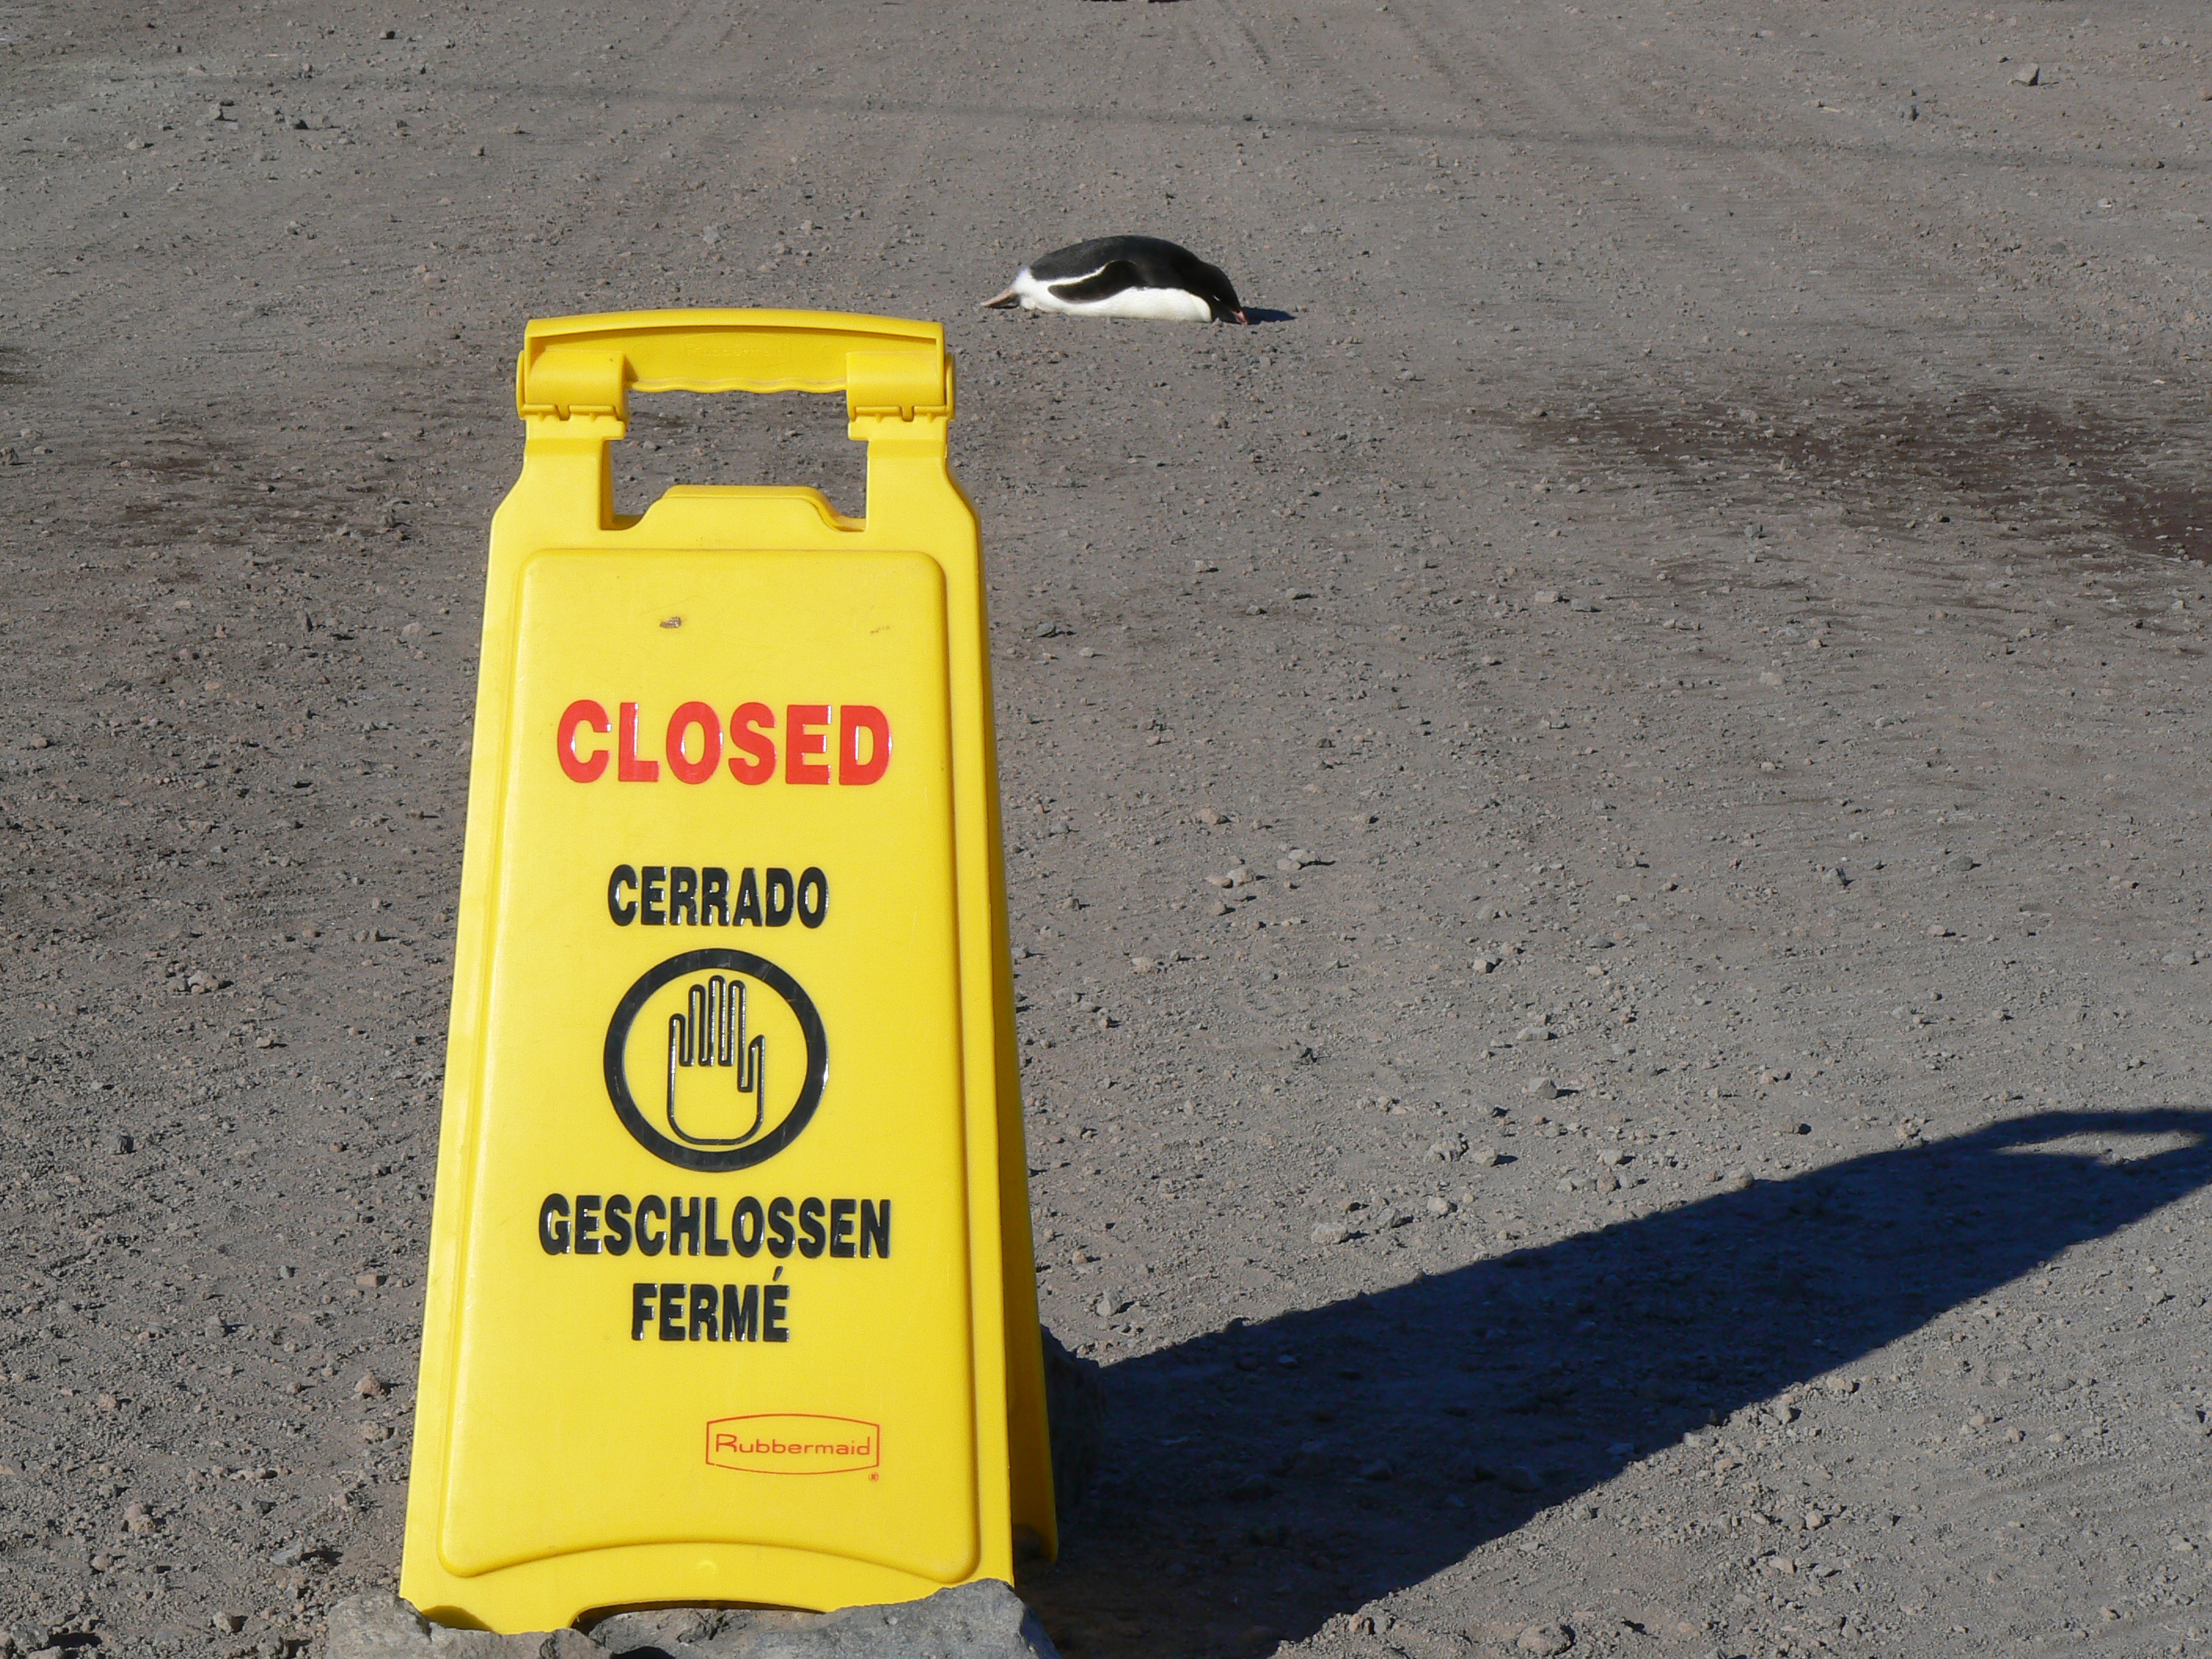 Penguin and sign.